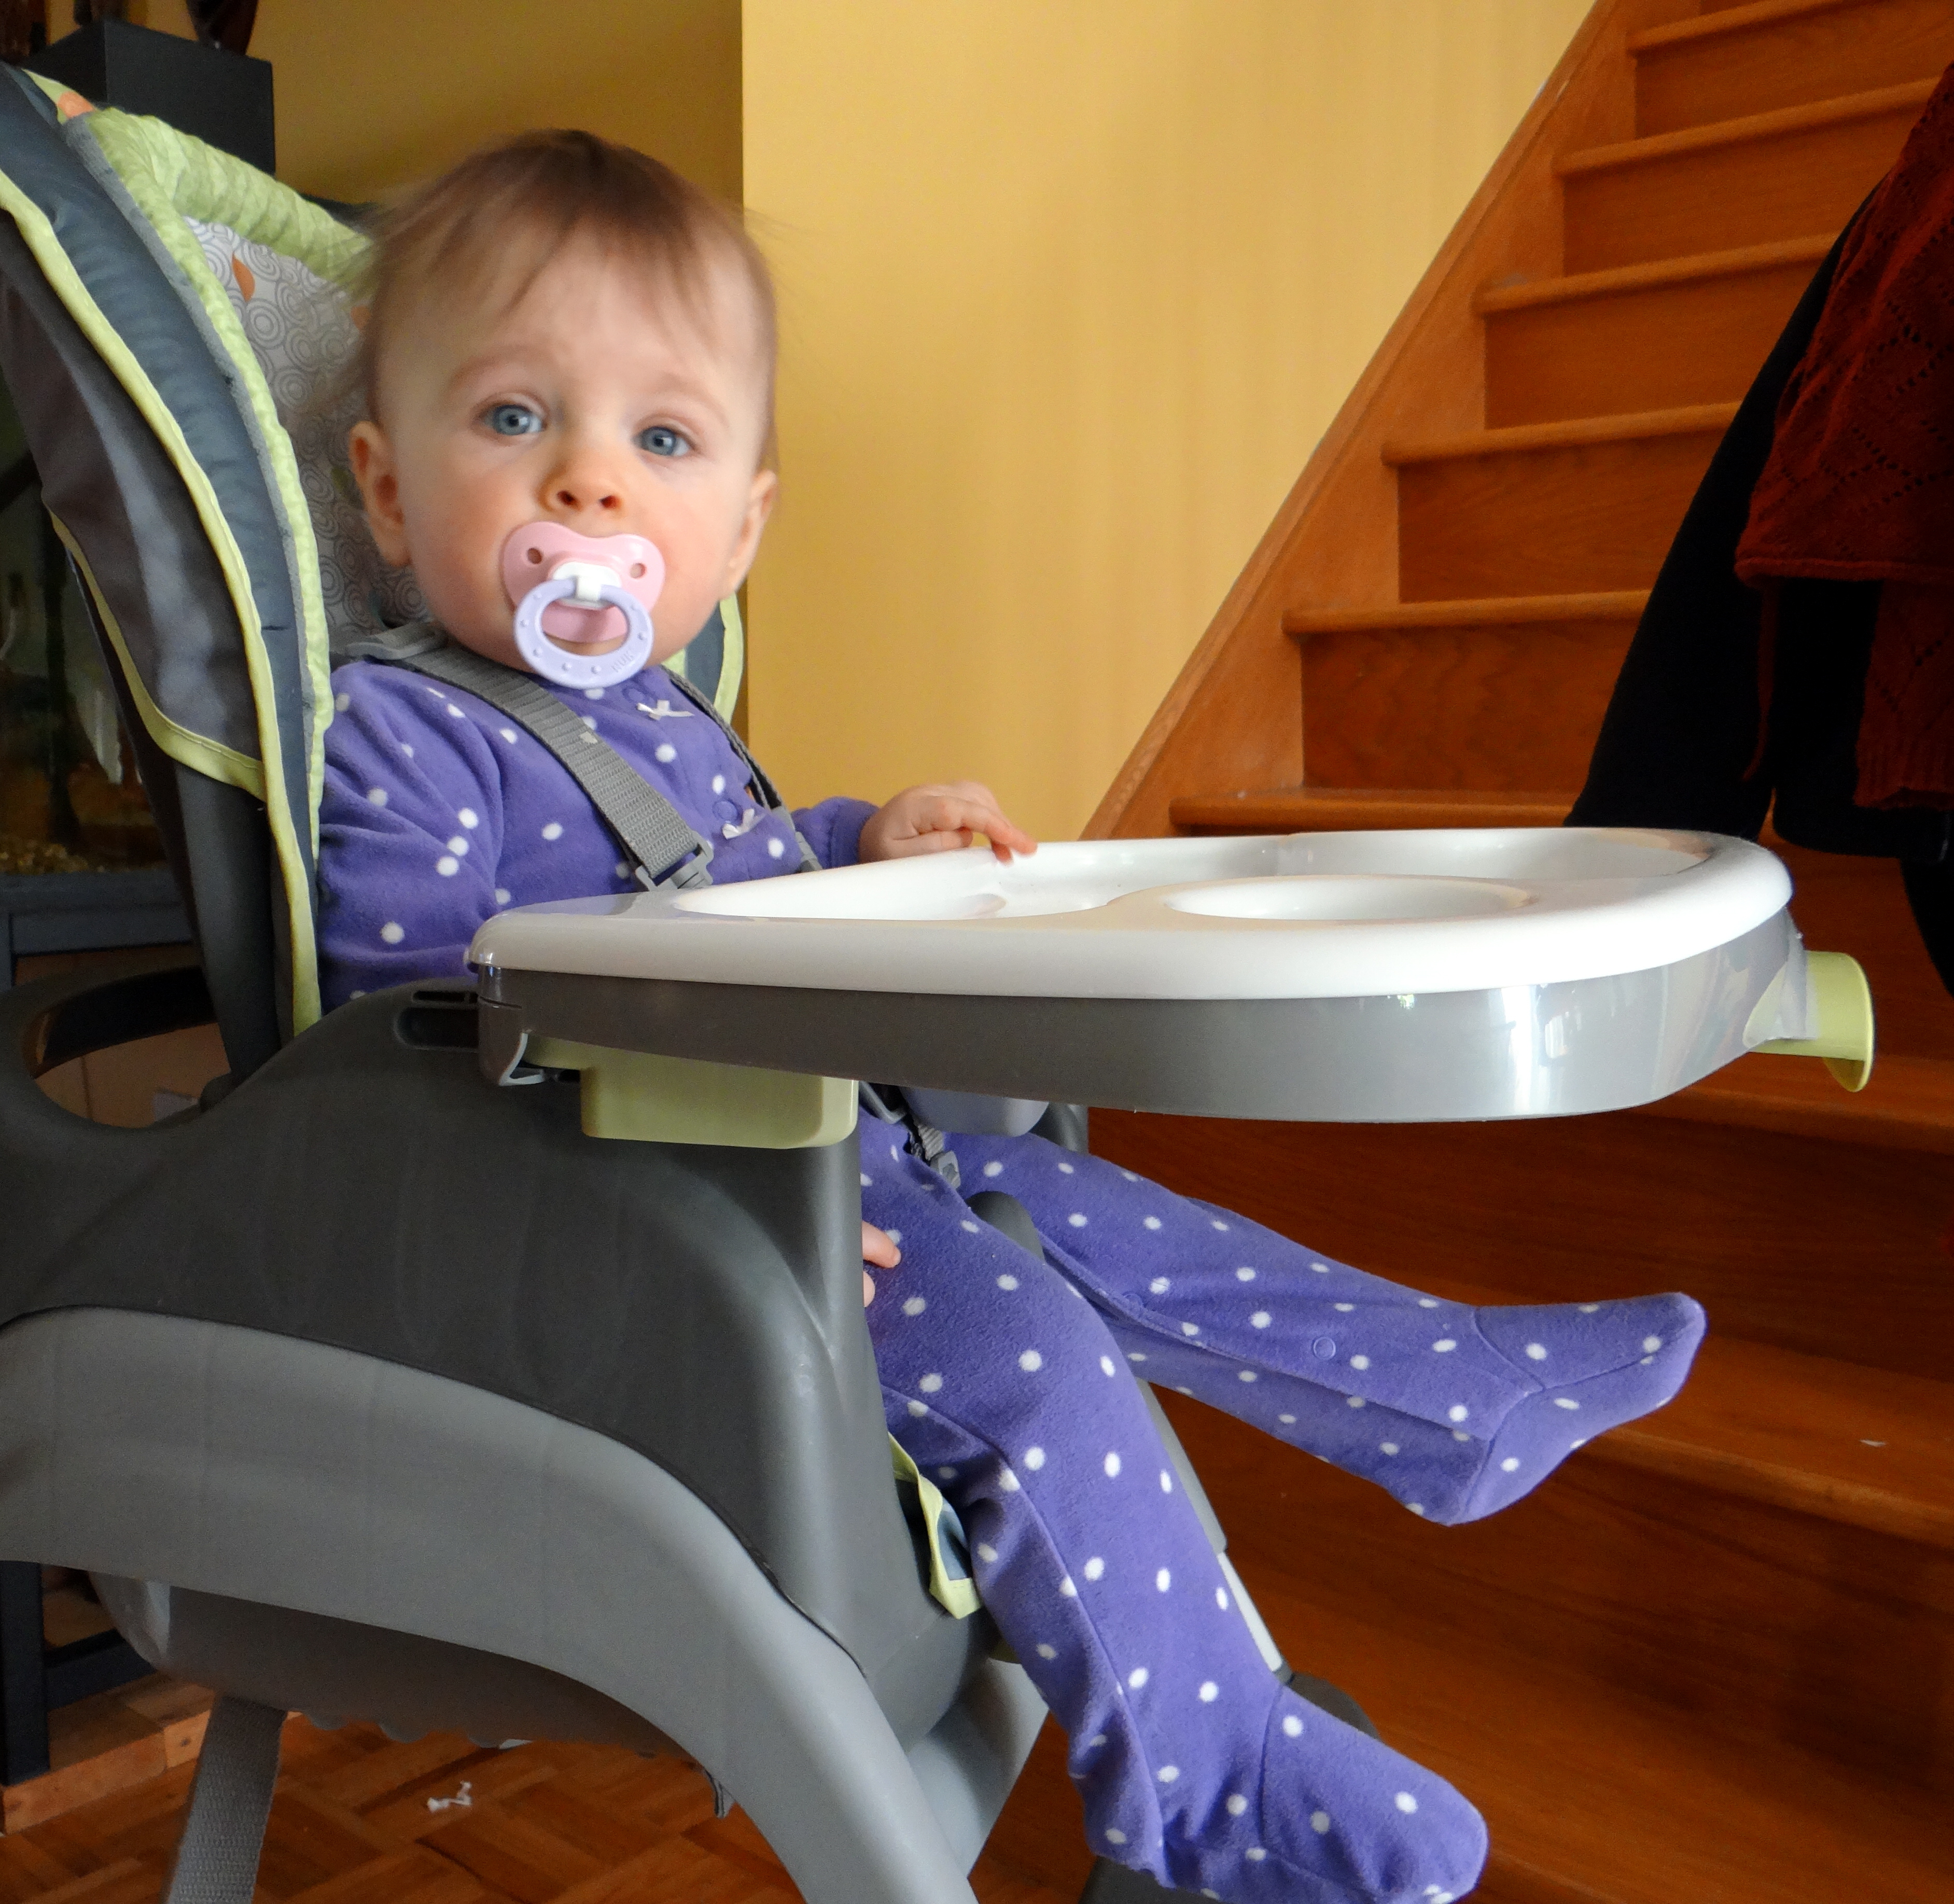 Baby girl in a high chair